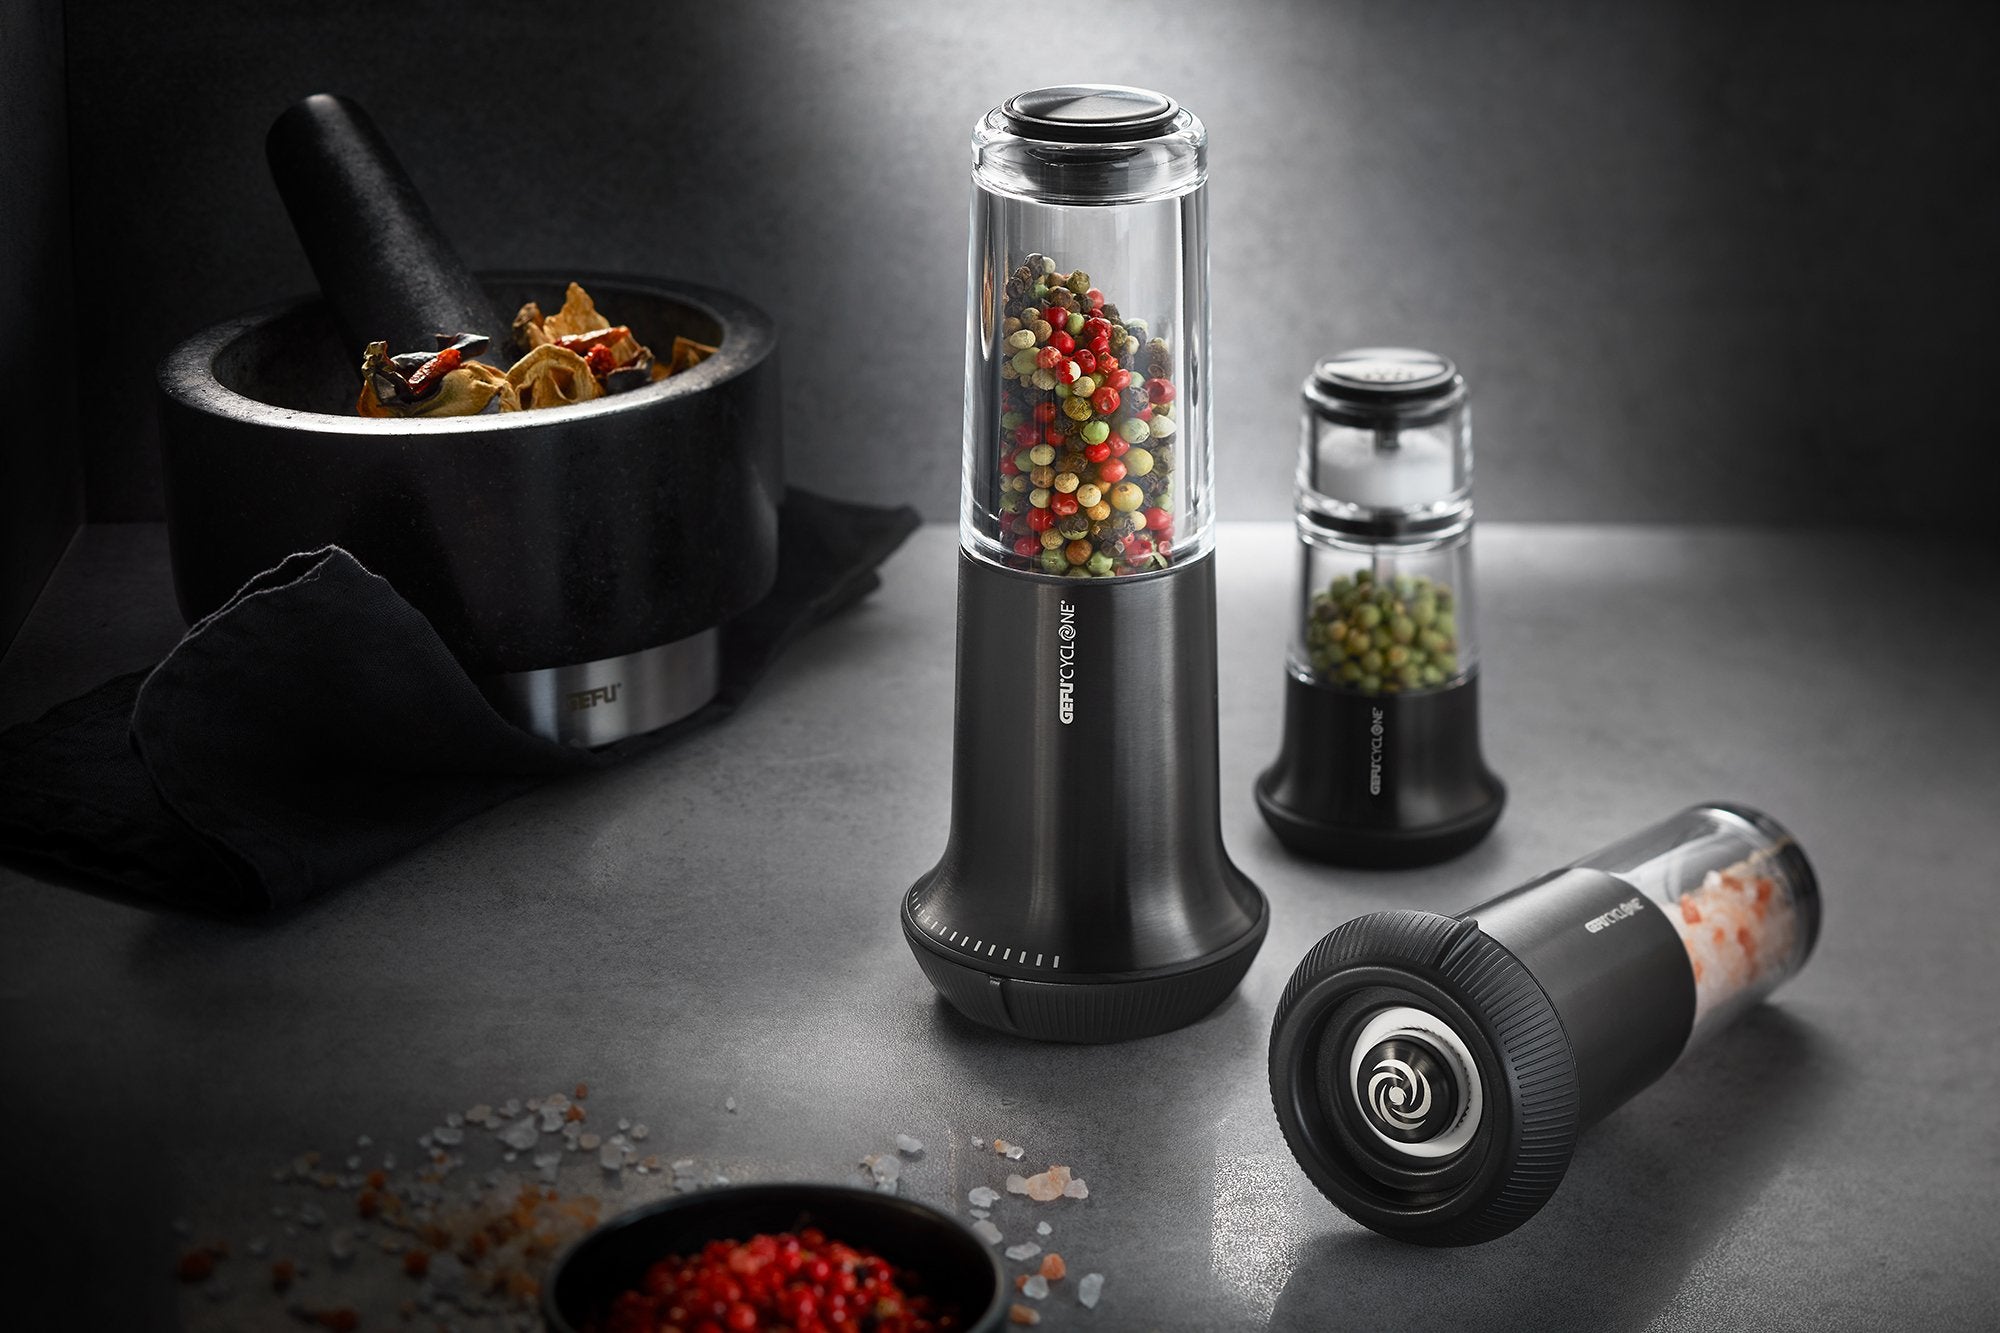 GEFU Pepper Mill With Salt Shaker X-Plosion®, Black - Whole and All